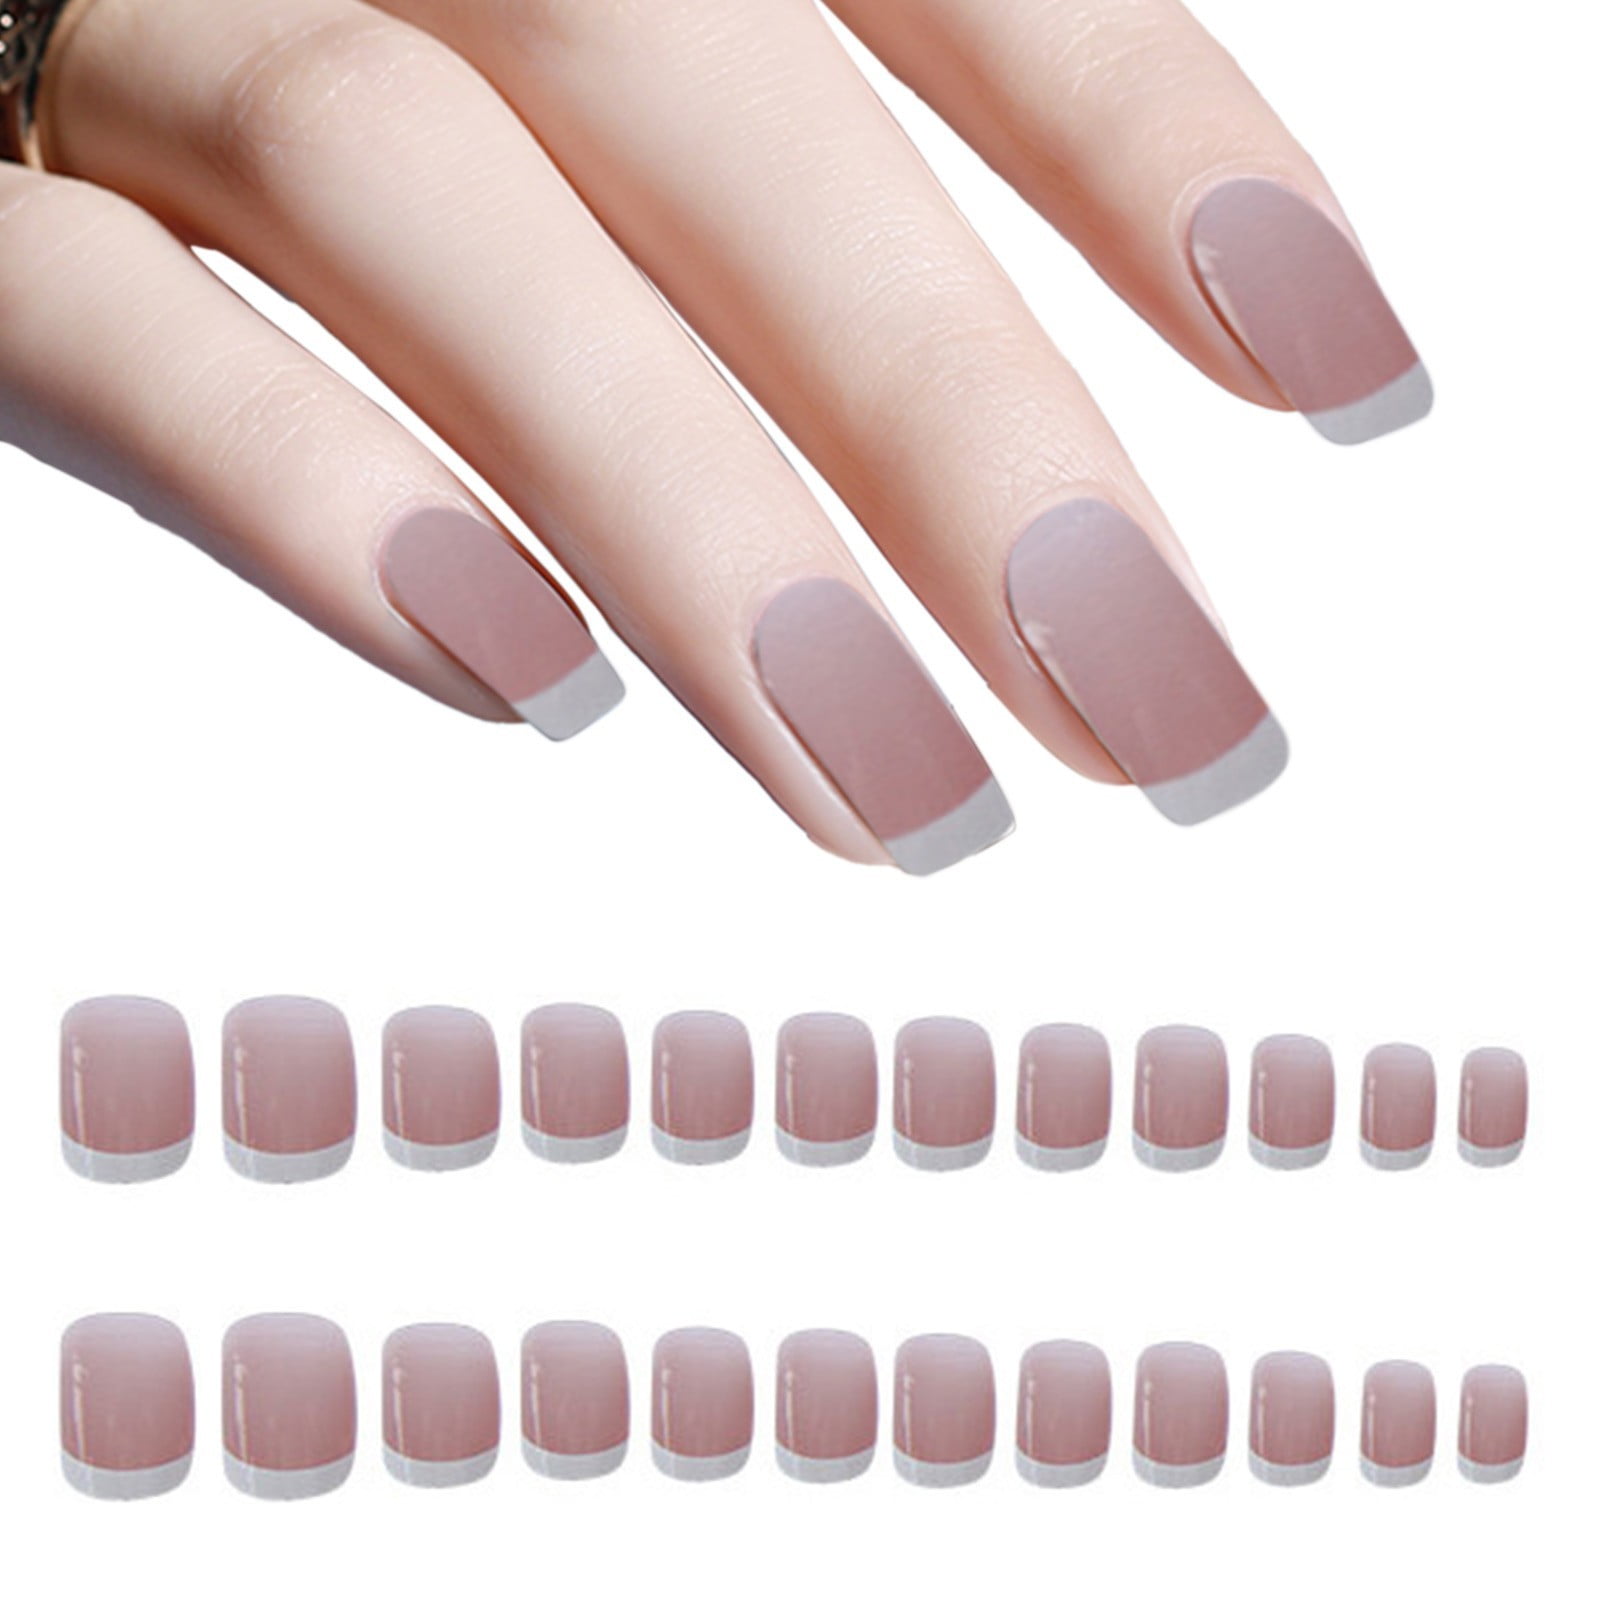 sunhillsgrace nail stickers nail charms medium length powder through french  white edge wearing nail finished product w155 [with inner glue model] 